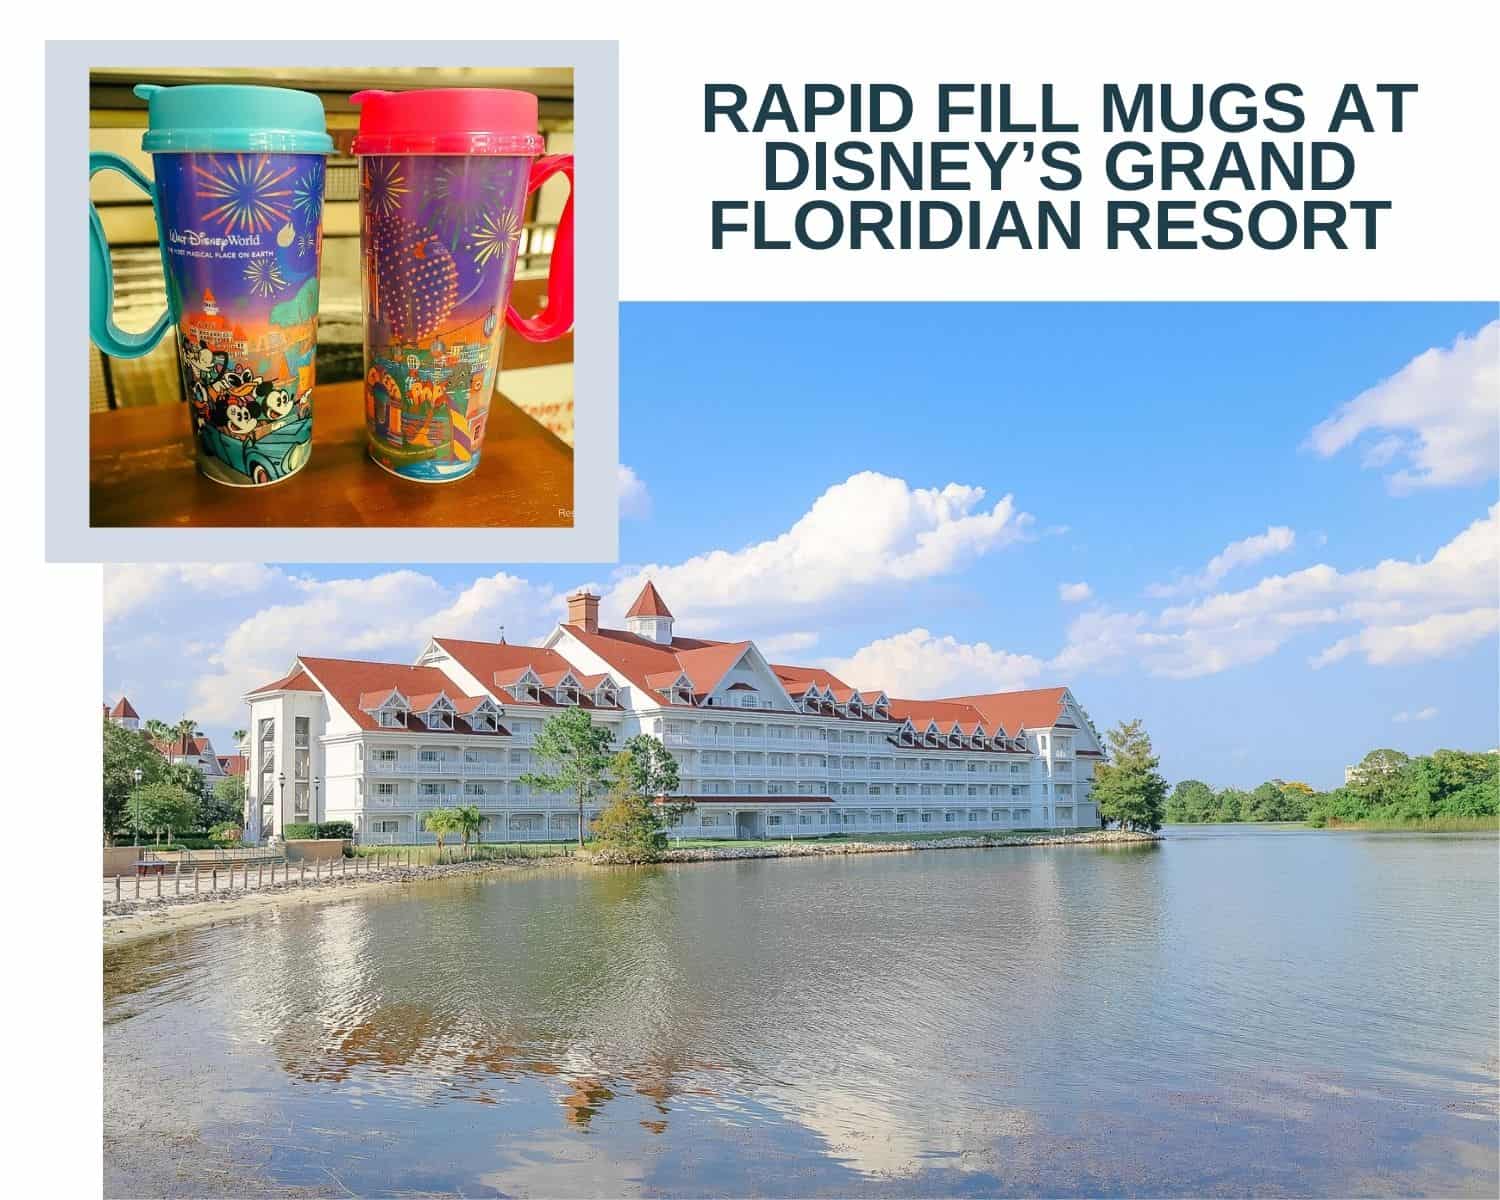 The 2 Places to Refill Rapid Fill Mugs at Disney’s Grand Floridian Resort